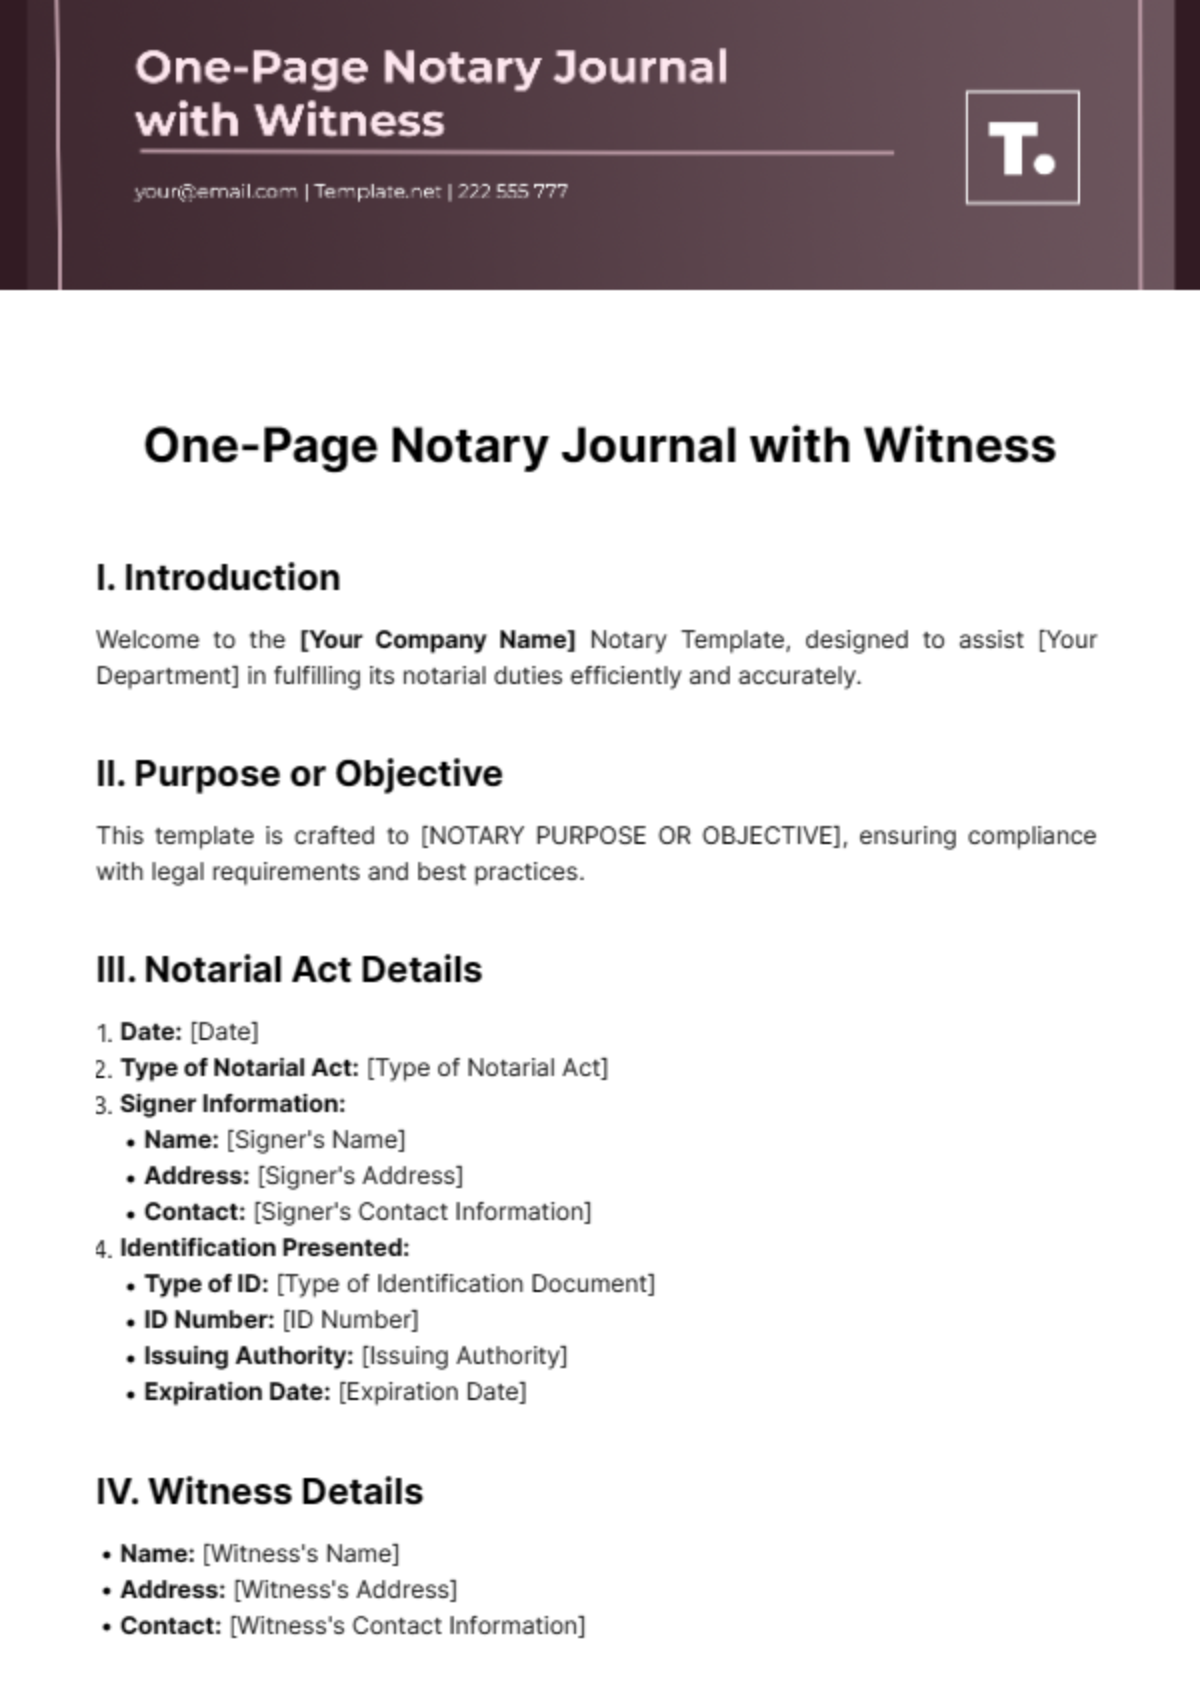 One-Page Notary Journal with Witness Template